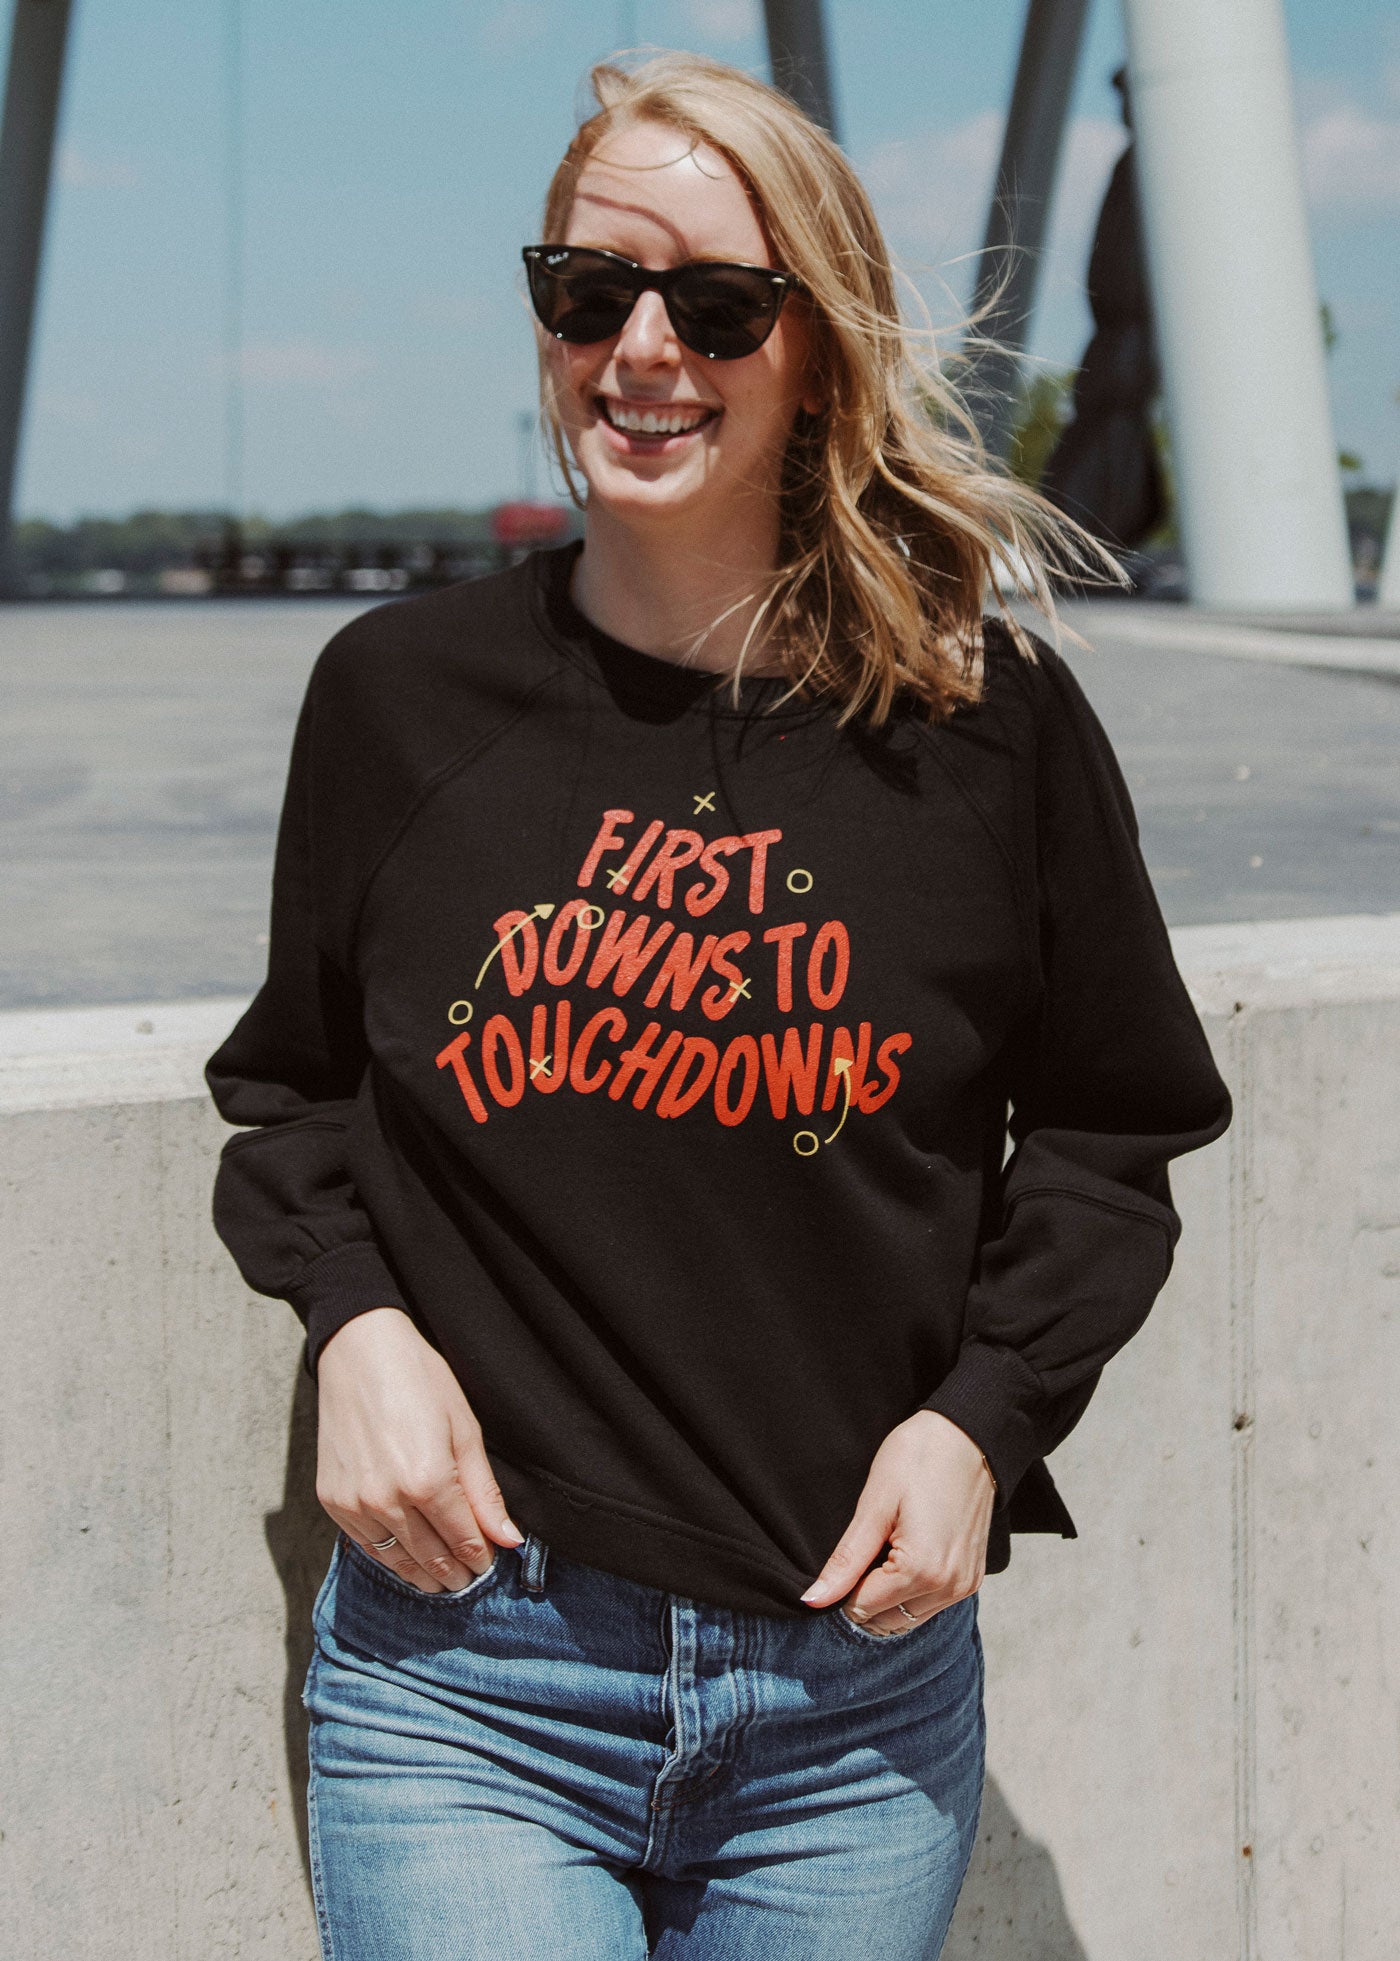 FIRST DOWNS TO TOUCHDOWNS SWEATSHIRT RED/GOLD